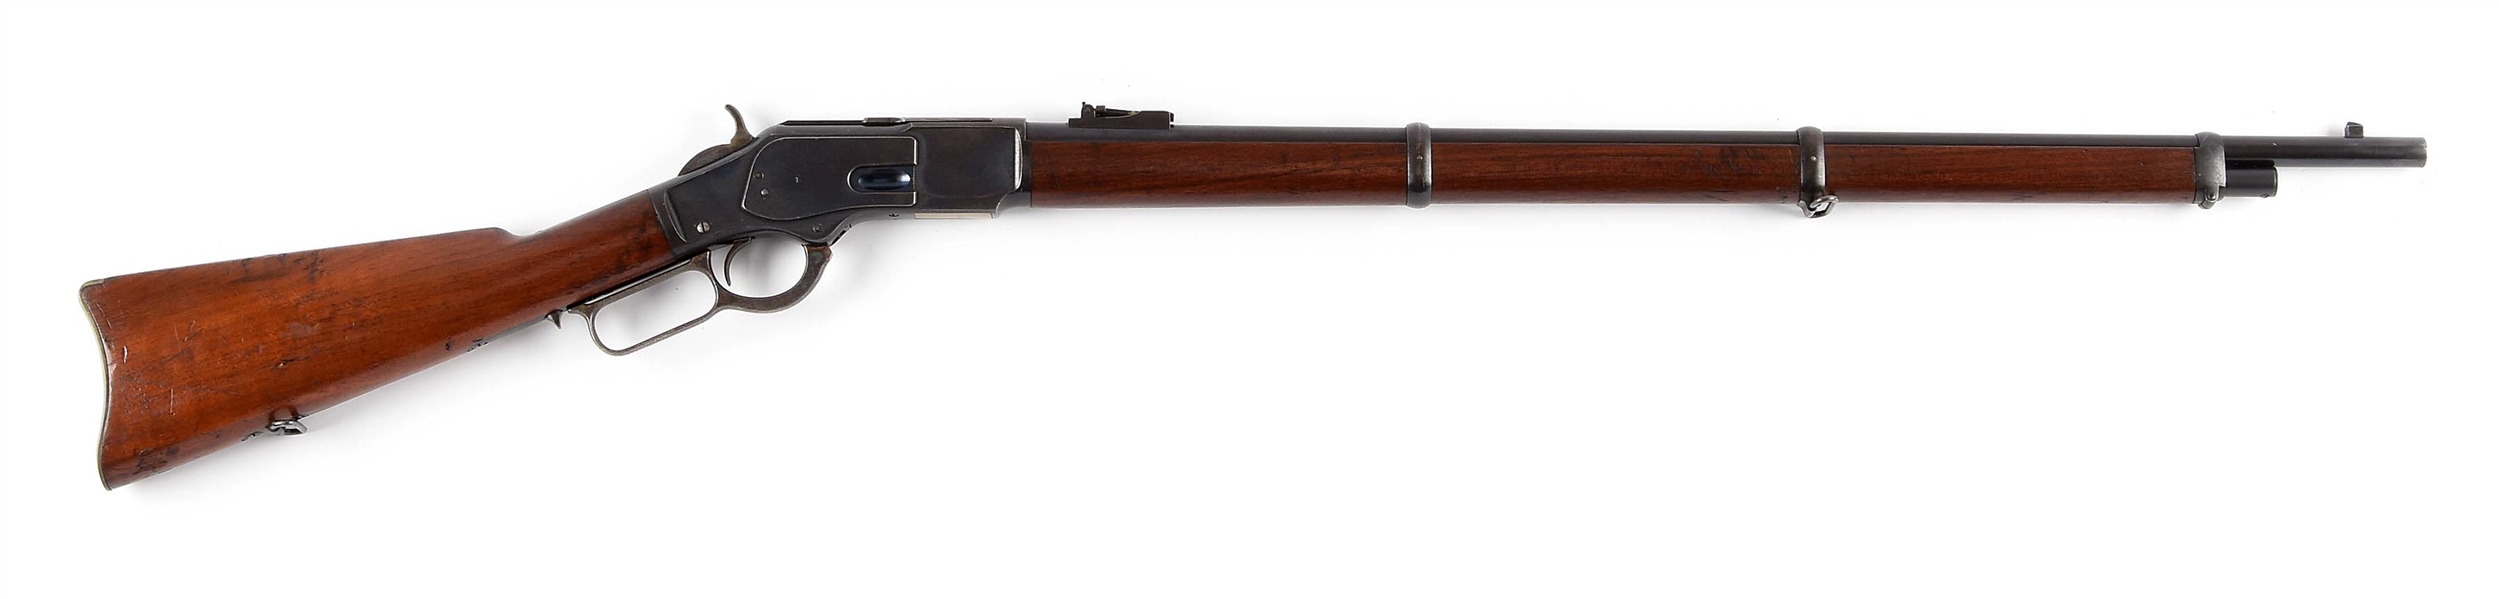 (A) WINCHESTER THIRD MODEL 1873 MUSKET LEVER ACTION RIFLE.